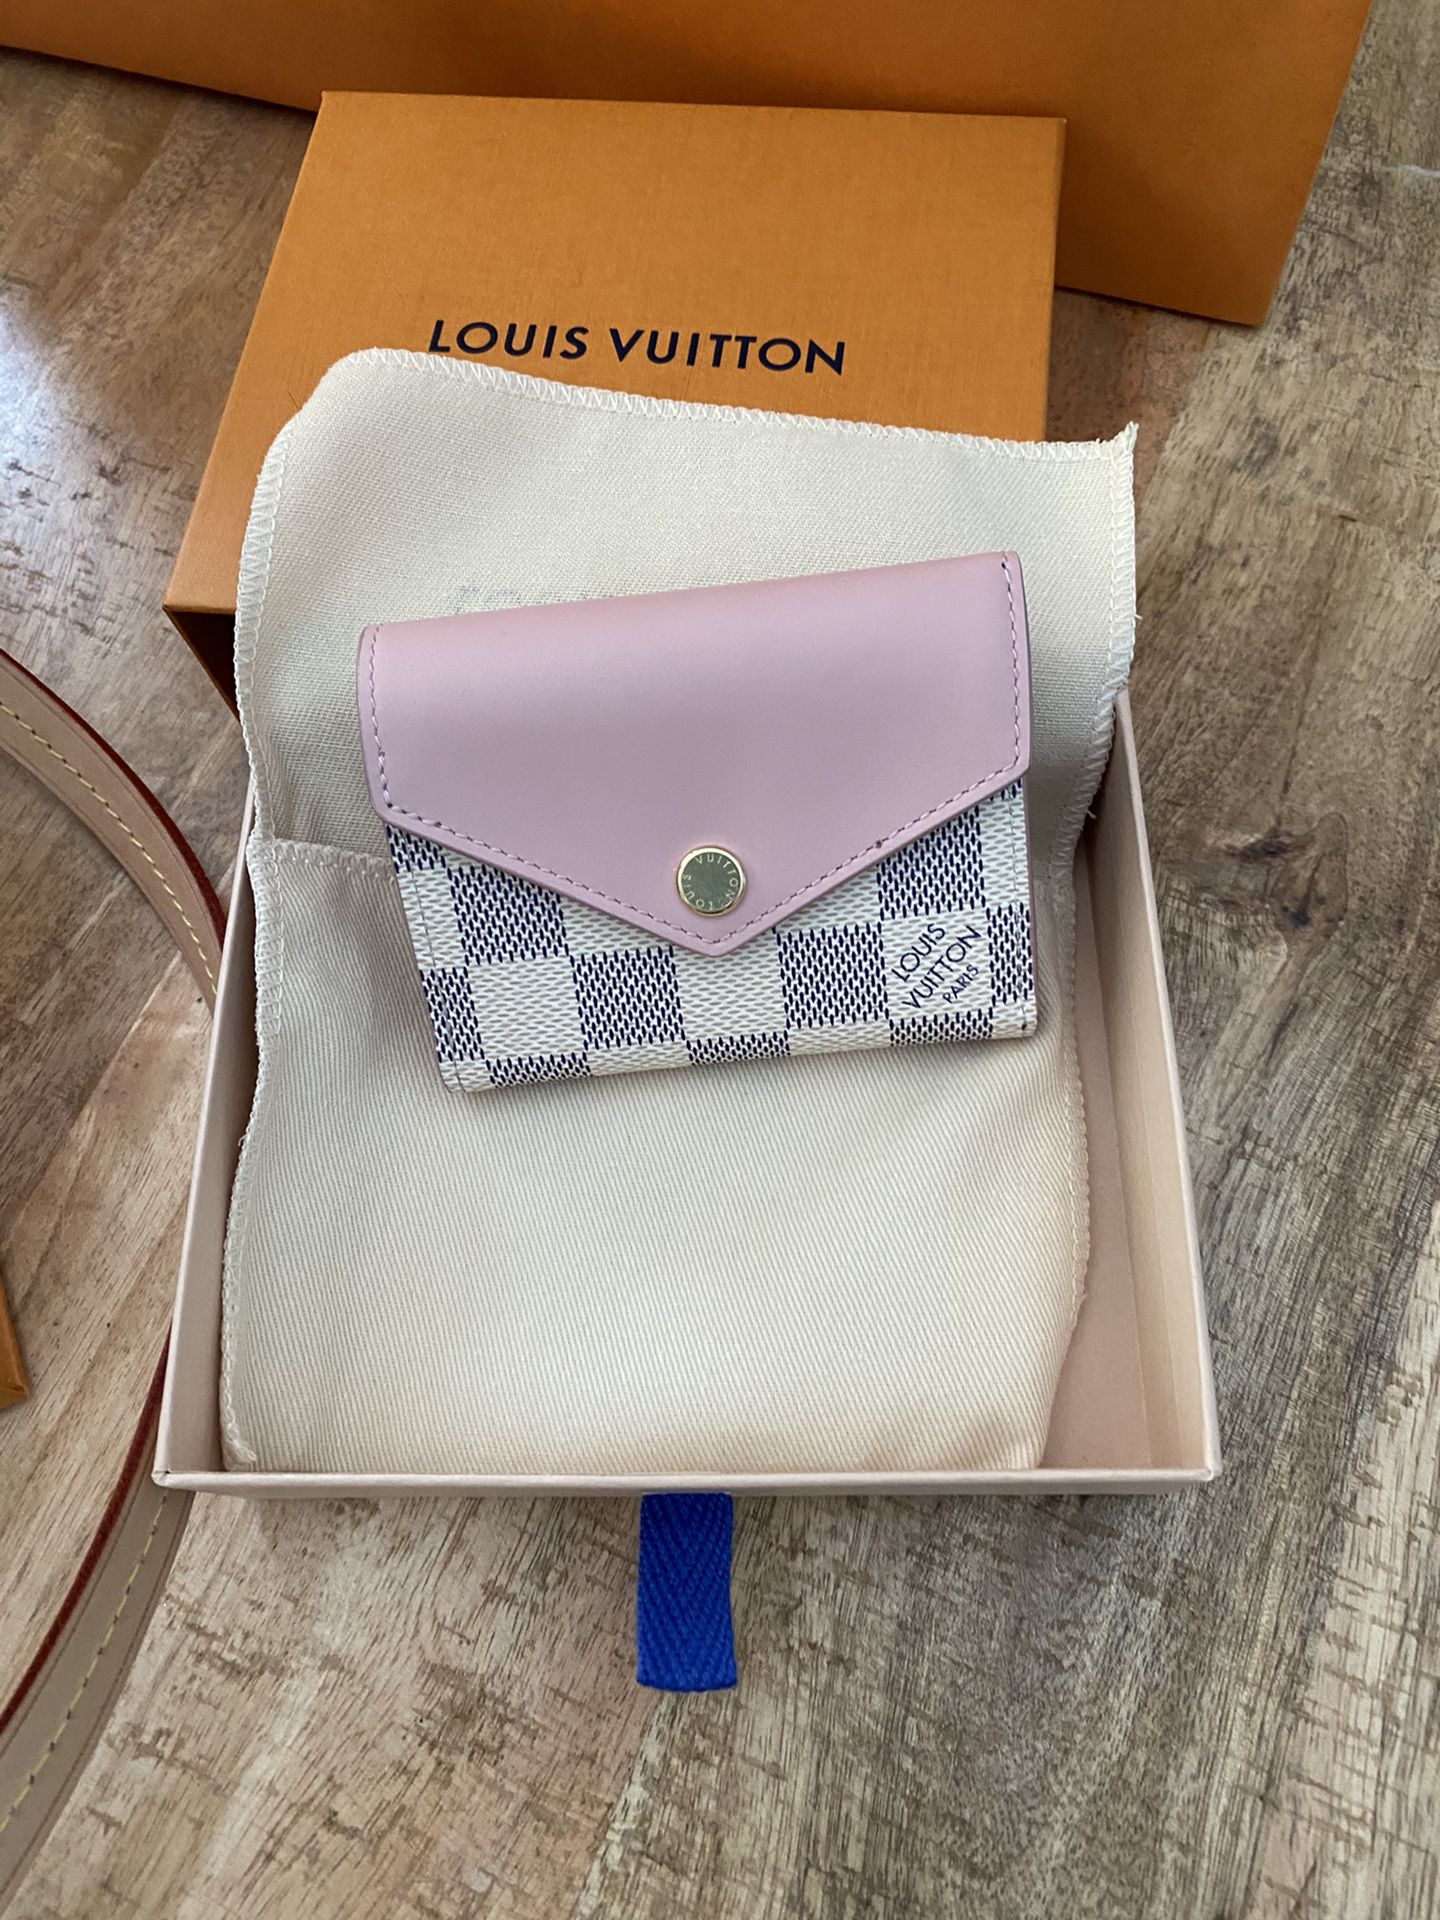 Louis Vuitton Crossbody Purse And Wallet for Sale in Brooksville, FL